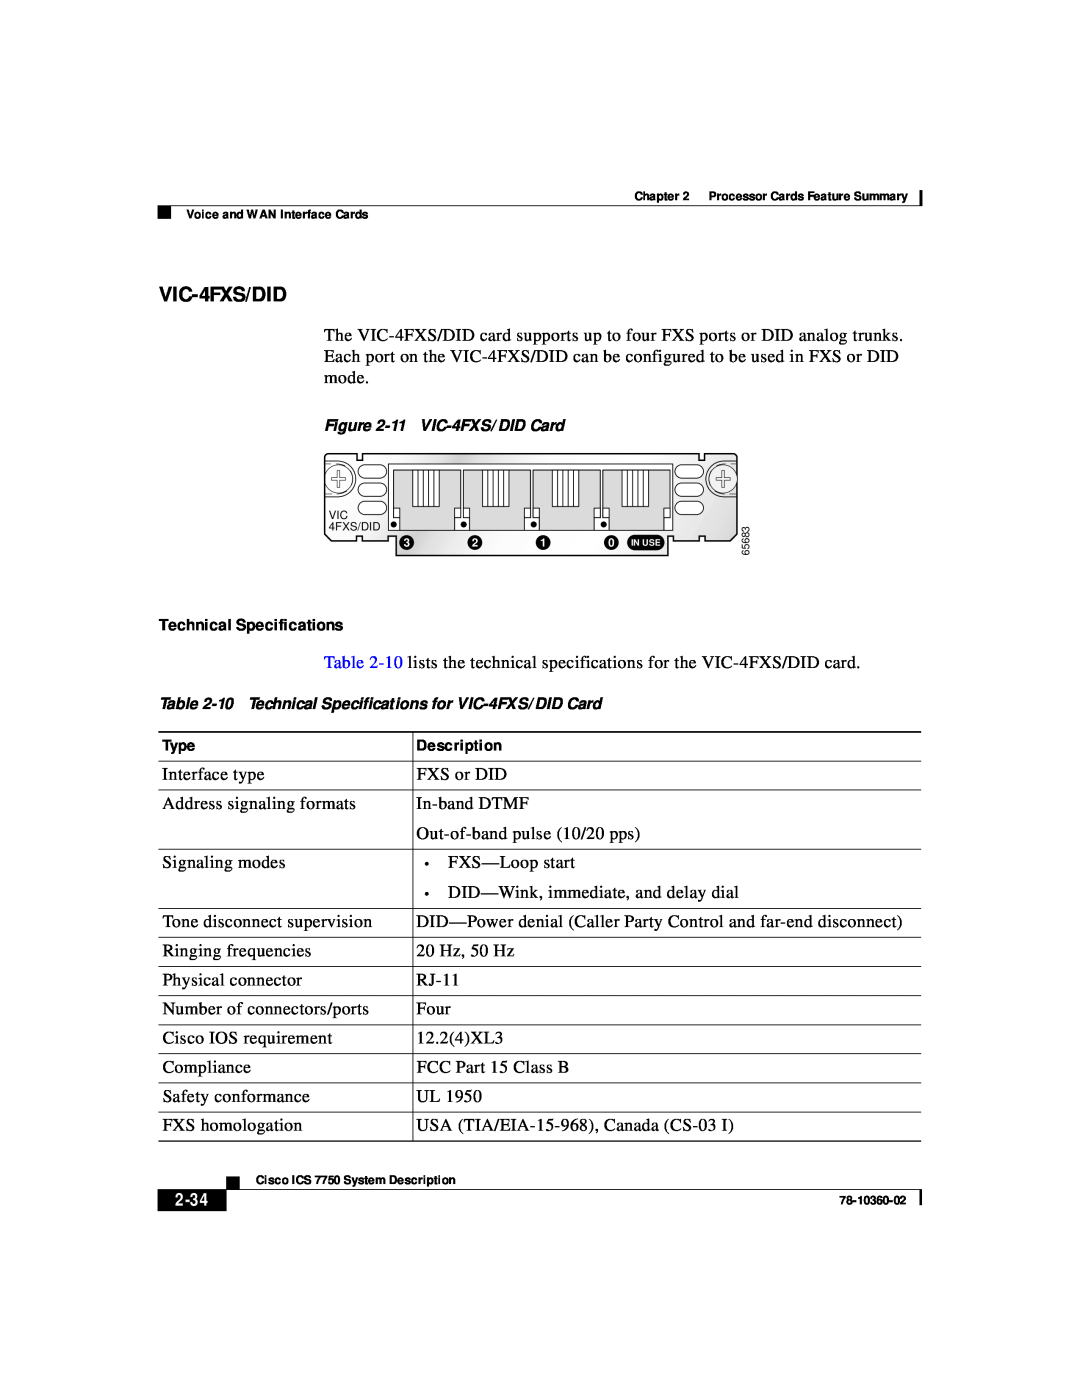 Cisco Systems ICS-7750 manual Technical Specifications, 2-34, 11 VIC-4FXS/DID Card 